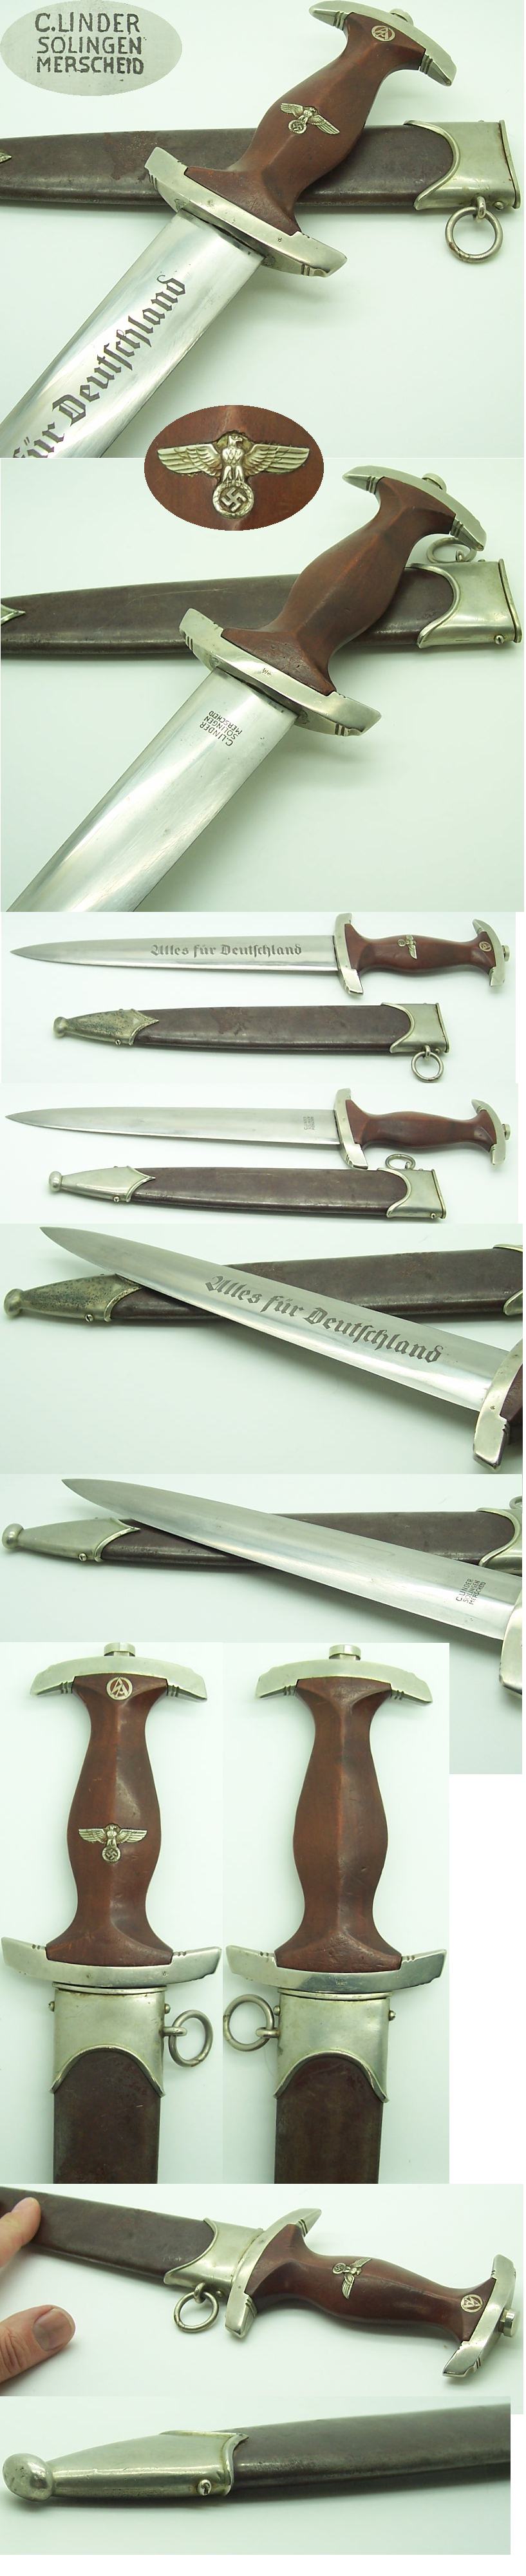 Early SA Dagger by C. Linder